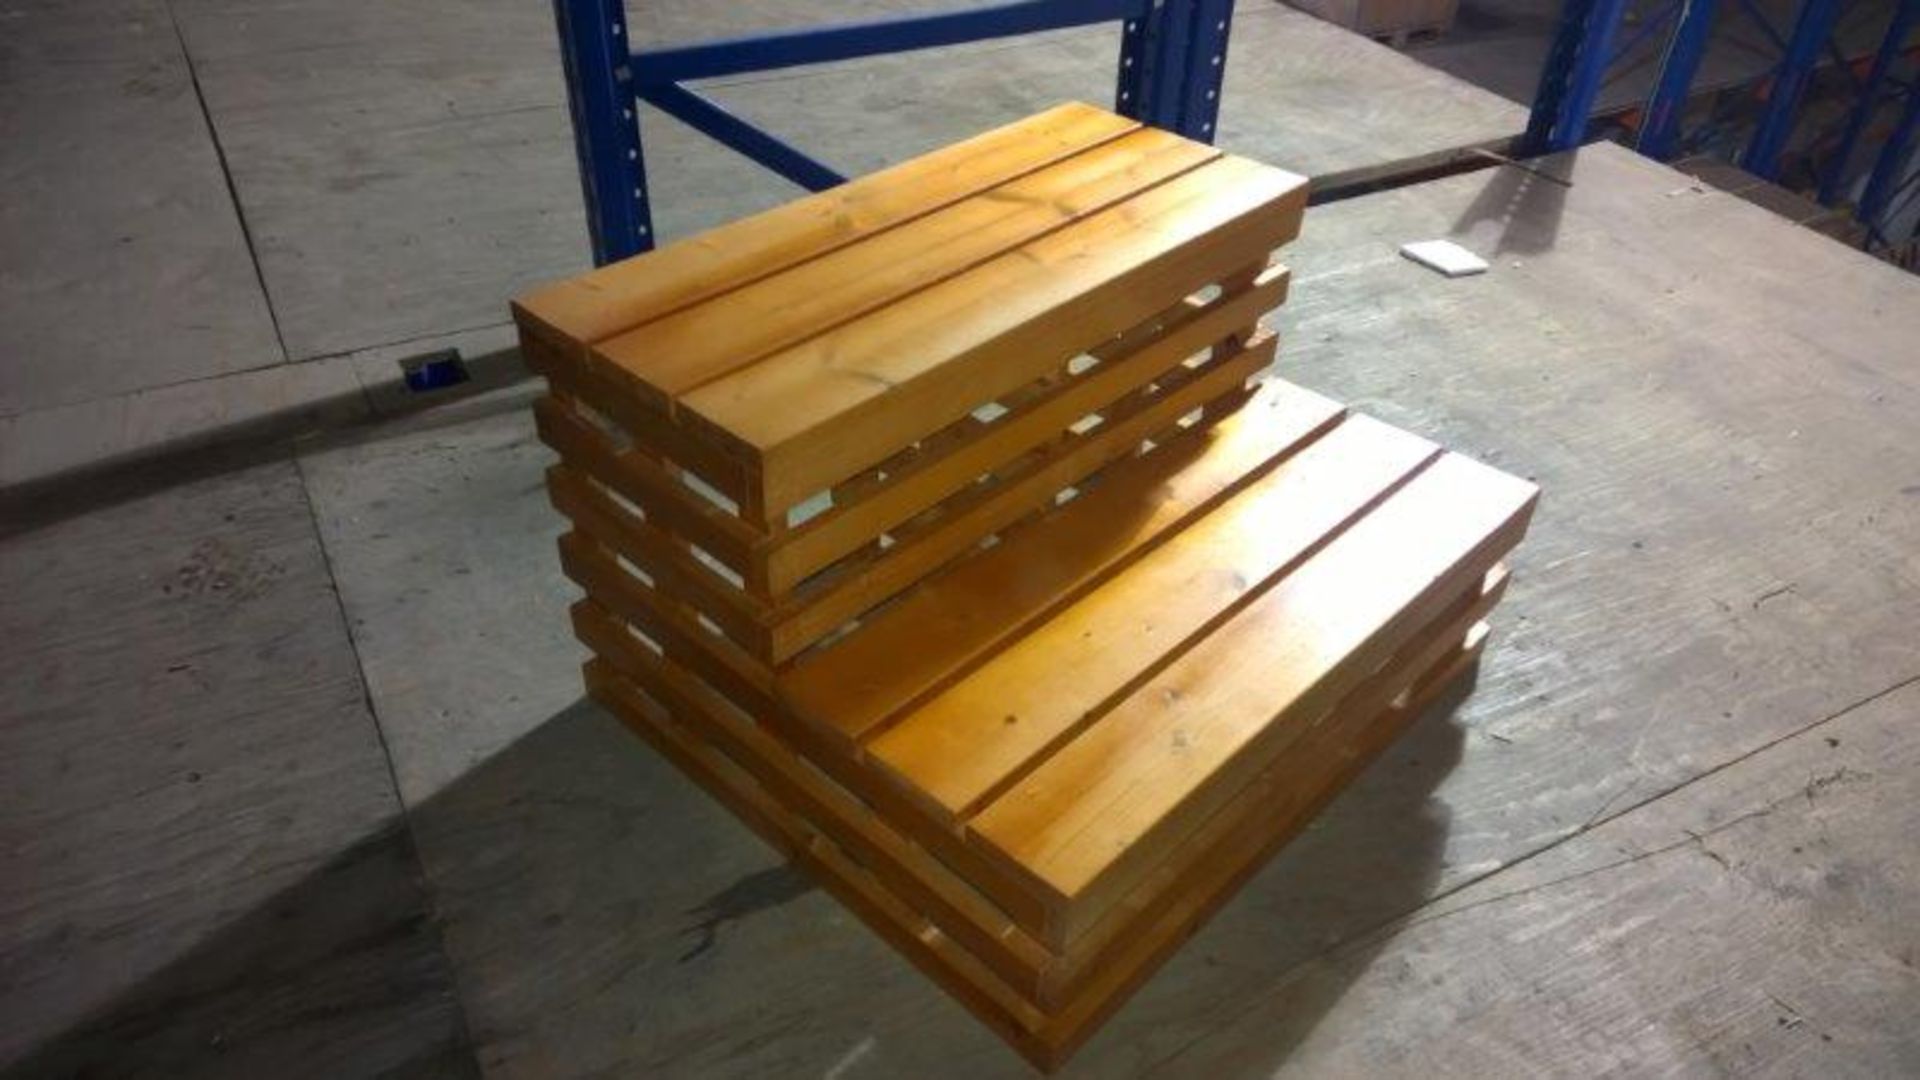 Bath/hot tub steps, solid wood, well made - new and boxed  delivery possible on this item, to